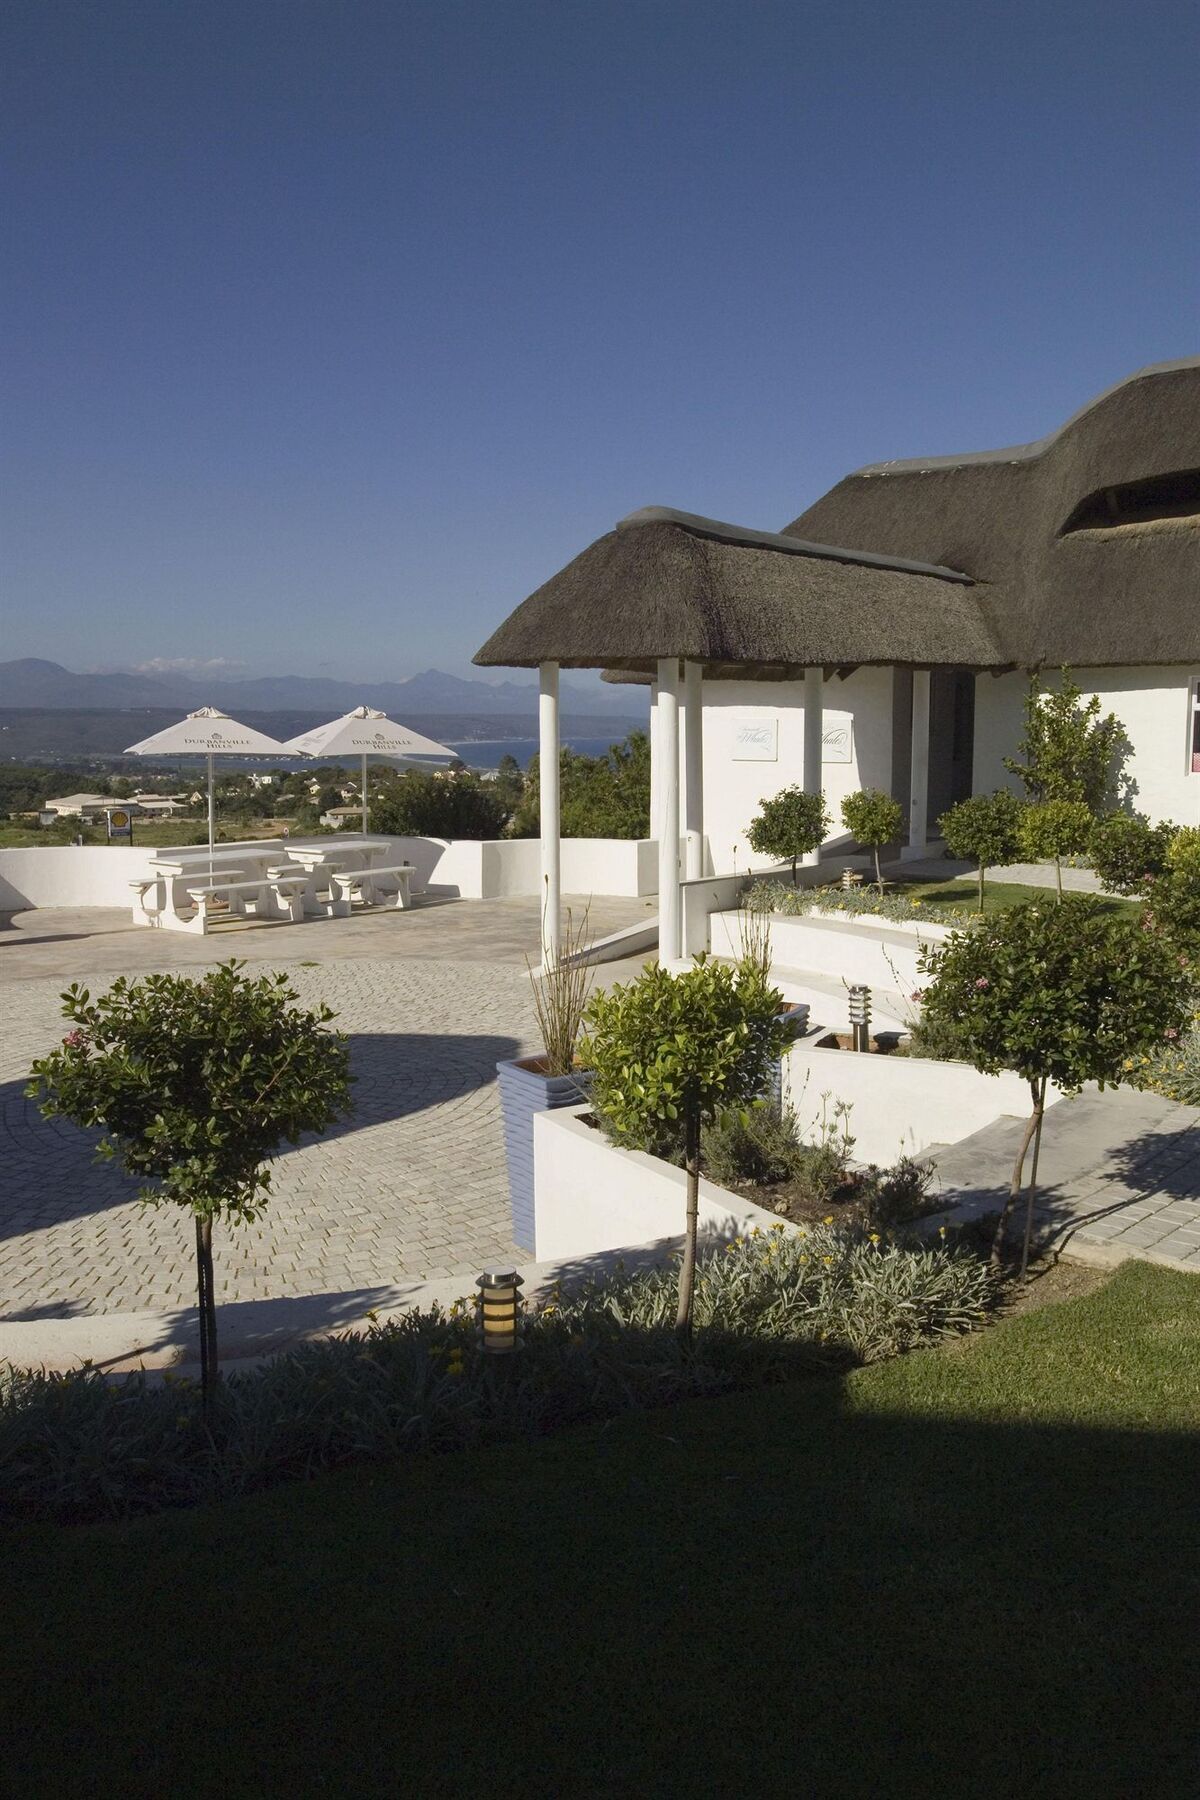 Whalesong Hotel & Spa Plettenberg Bay Exterior photo